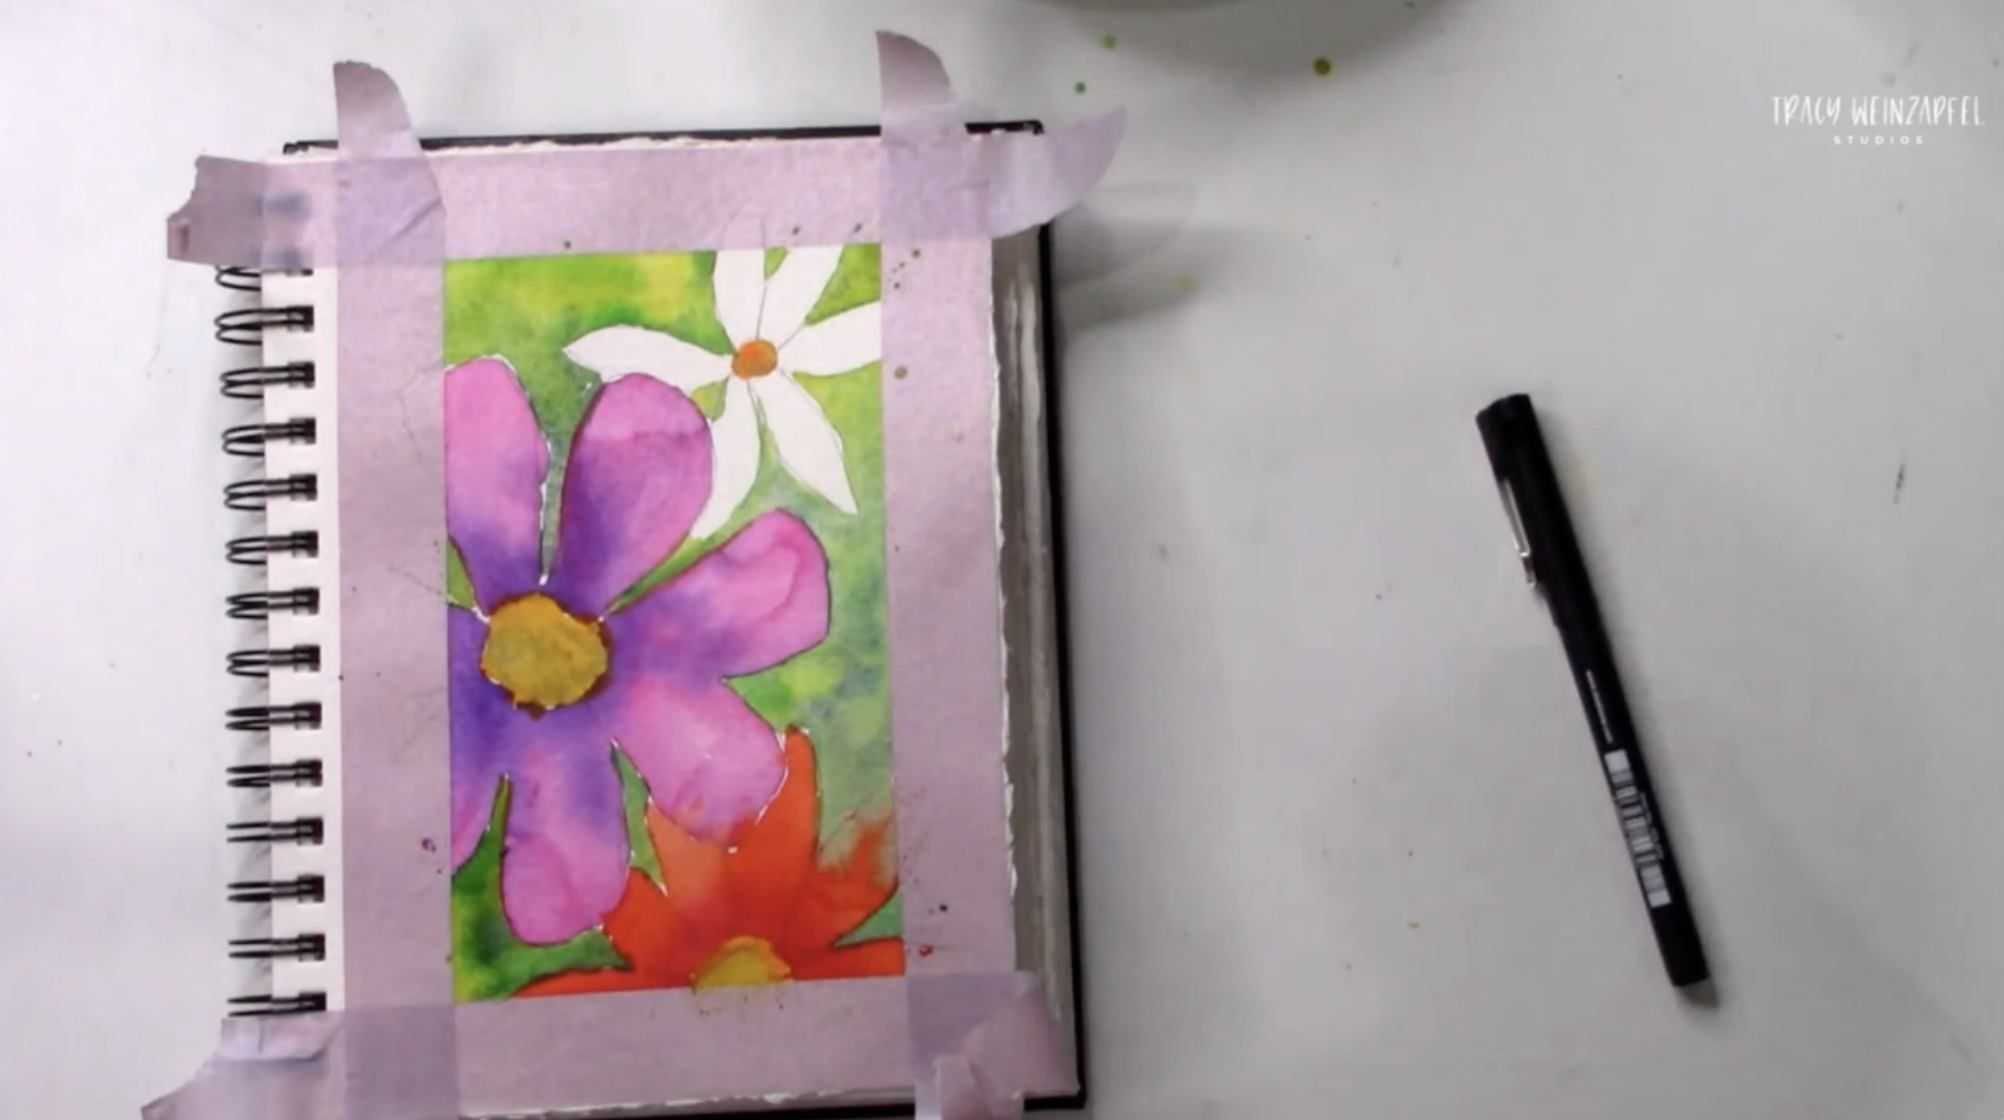 Adding watercolor paint to flowers